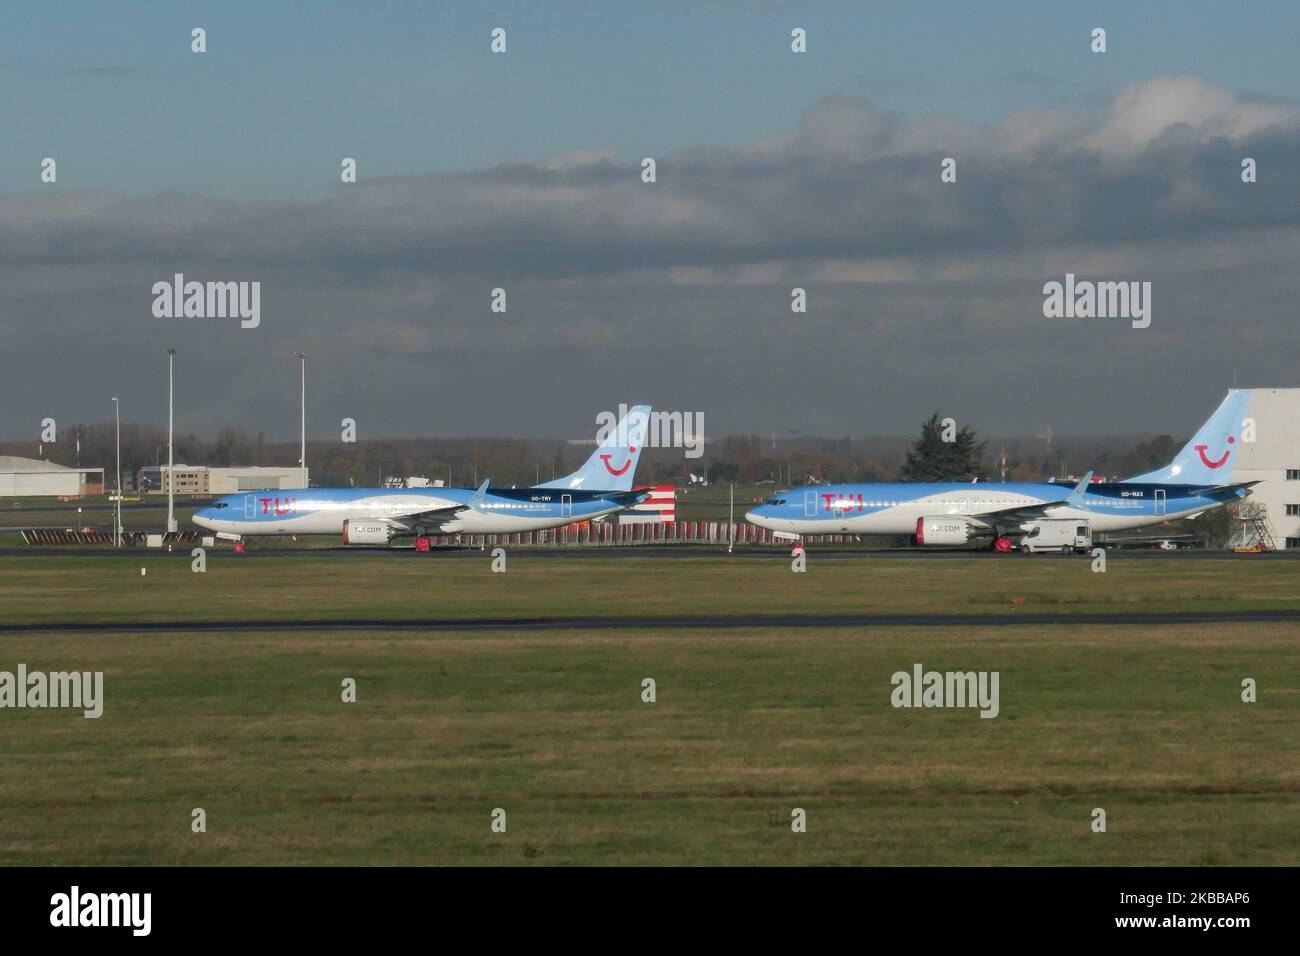 Batch of TUI fly Belgium or TUI Airways Boeing 737 MAX 8 airplanes grounded at Brussels National Airport Zaventem BRU EBBR in Belgium. The planes are parked with wheels and engines covered since March 12, 2019 as the EASA - European Union Aviation Safety Agency suspended all flight operations and FAA of the 737 MAX 8 and 737 MAX 9 with a safety directive because of the MCAS system failure resulting two accidents of the same new aircraft type. TUI fly Belgium is a subsidiary airline of the TUI Group and part of the TUI Airlines. TUI Airways, formerly Thomson Airways BY TOM TOMJET is the largest Stock Photo